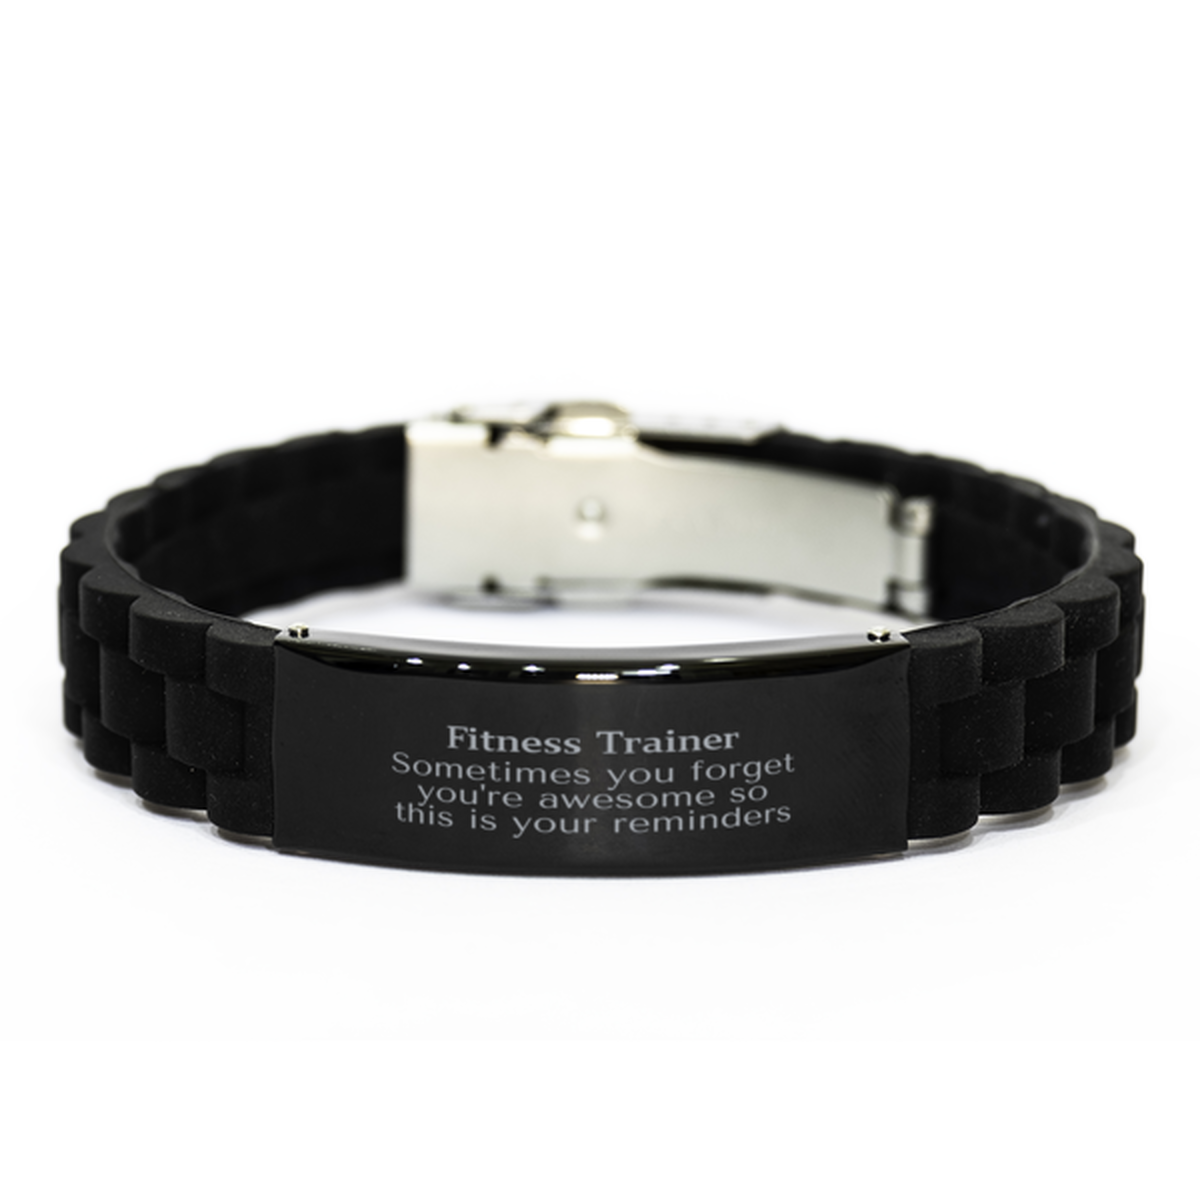 Sentimental Fitness Trainer Black Glidelock Clasp Bracelet, Fitness Trainer Sometimes you forget you're awesome so this is your reminders, Graduation Christmas Birthday Gifts for Fitness Trainer, Men, Women, Coworkers